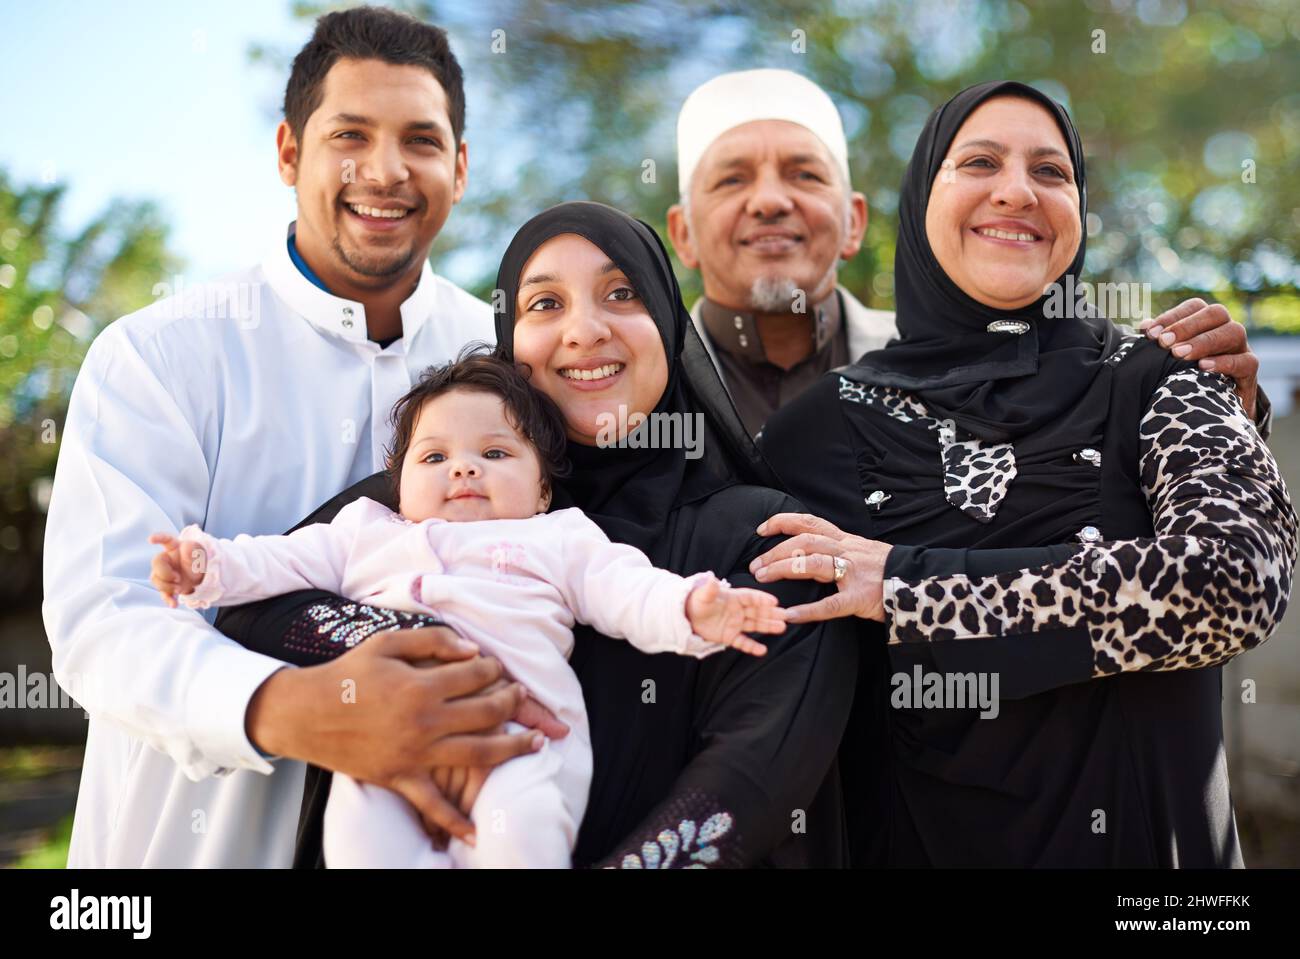 One big happy family. A muslim family enjoying a day outside. Stock Photo